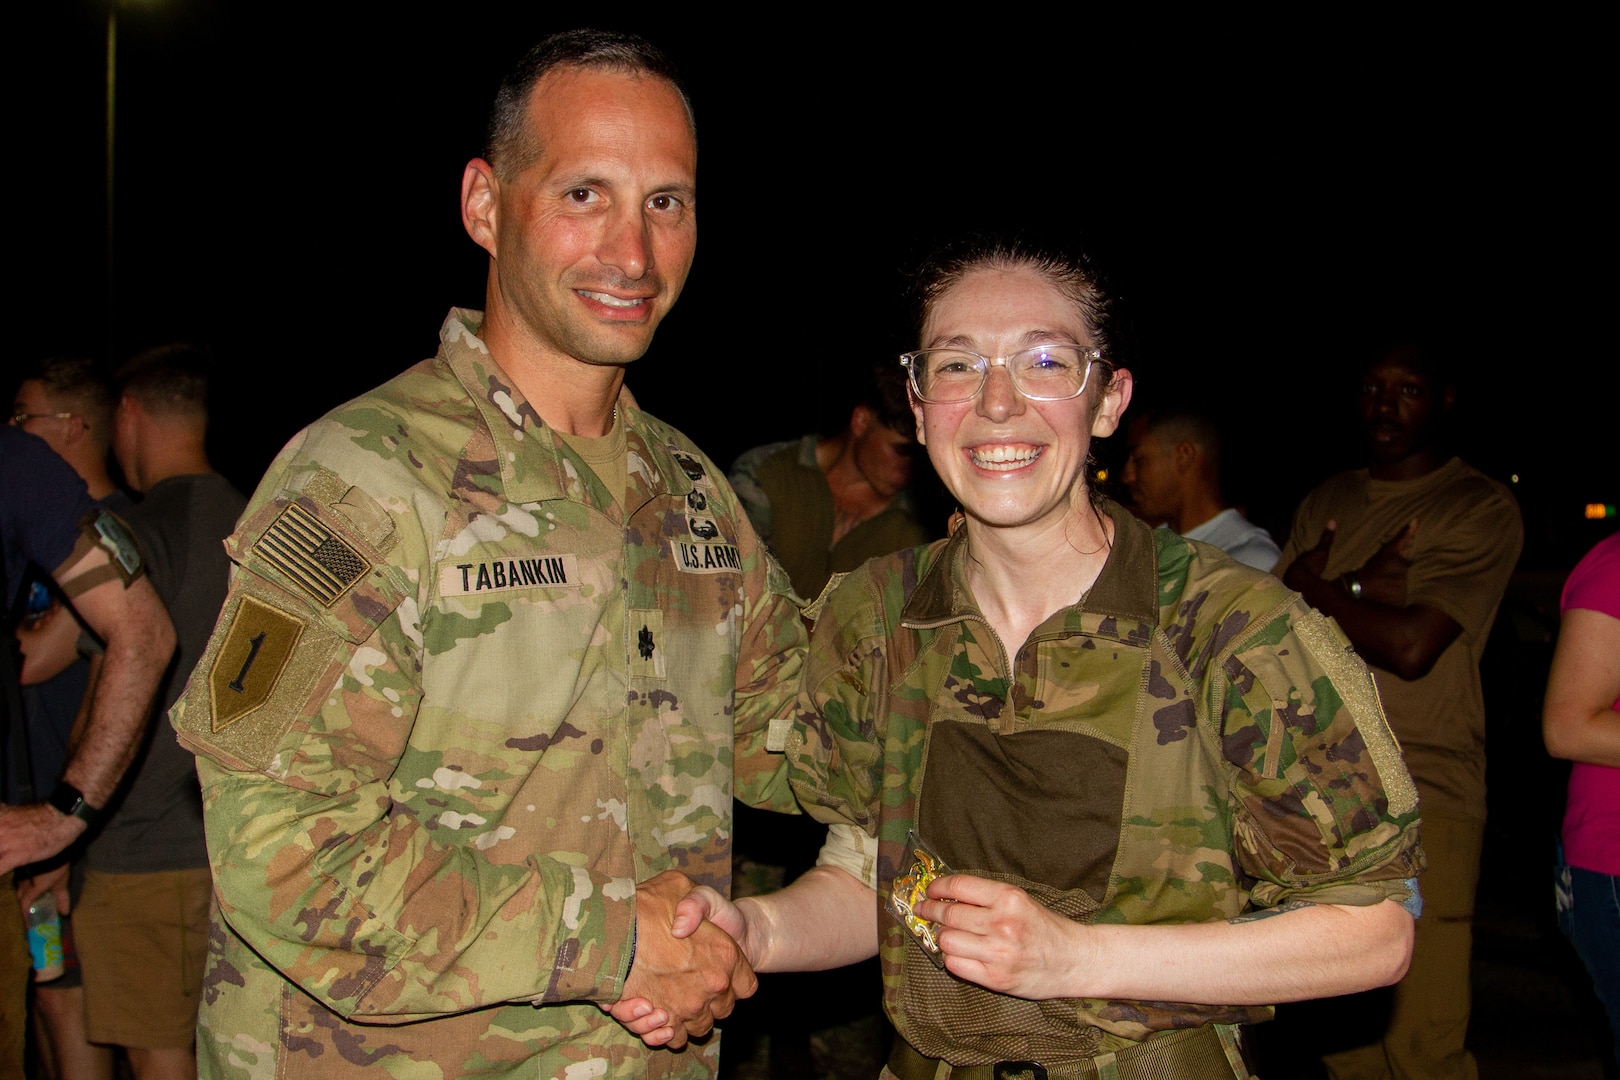 U.S. Army Lt. Col. Shawn Tabankin, commander of 1st Battalion, 69th Infantry Regiment, presents a challenge coin to Capt. Nina Skinner, a communications officer with 1st Battalion, 69th Infantry Regiment, after she completed a Norwegian Foot March at Camp Lemonnier, Djibouti, Dec. 16, 2022. Skinner placed first among the female participants with a finish time of 3 hours and 59 minutes.